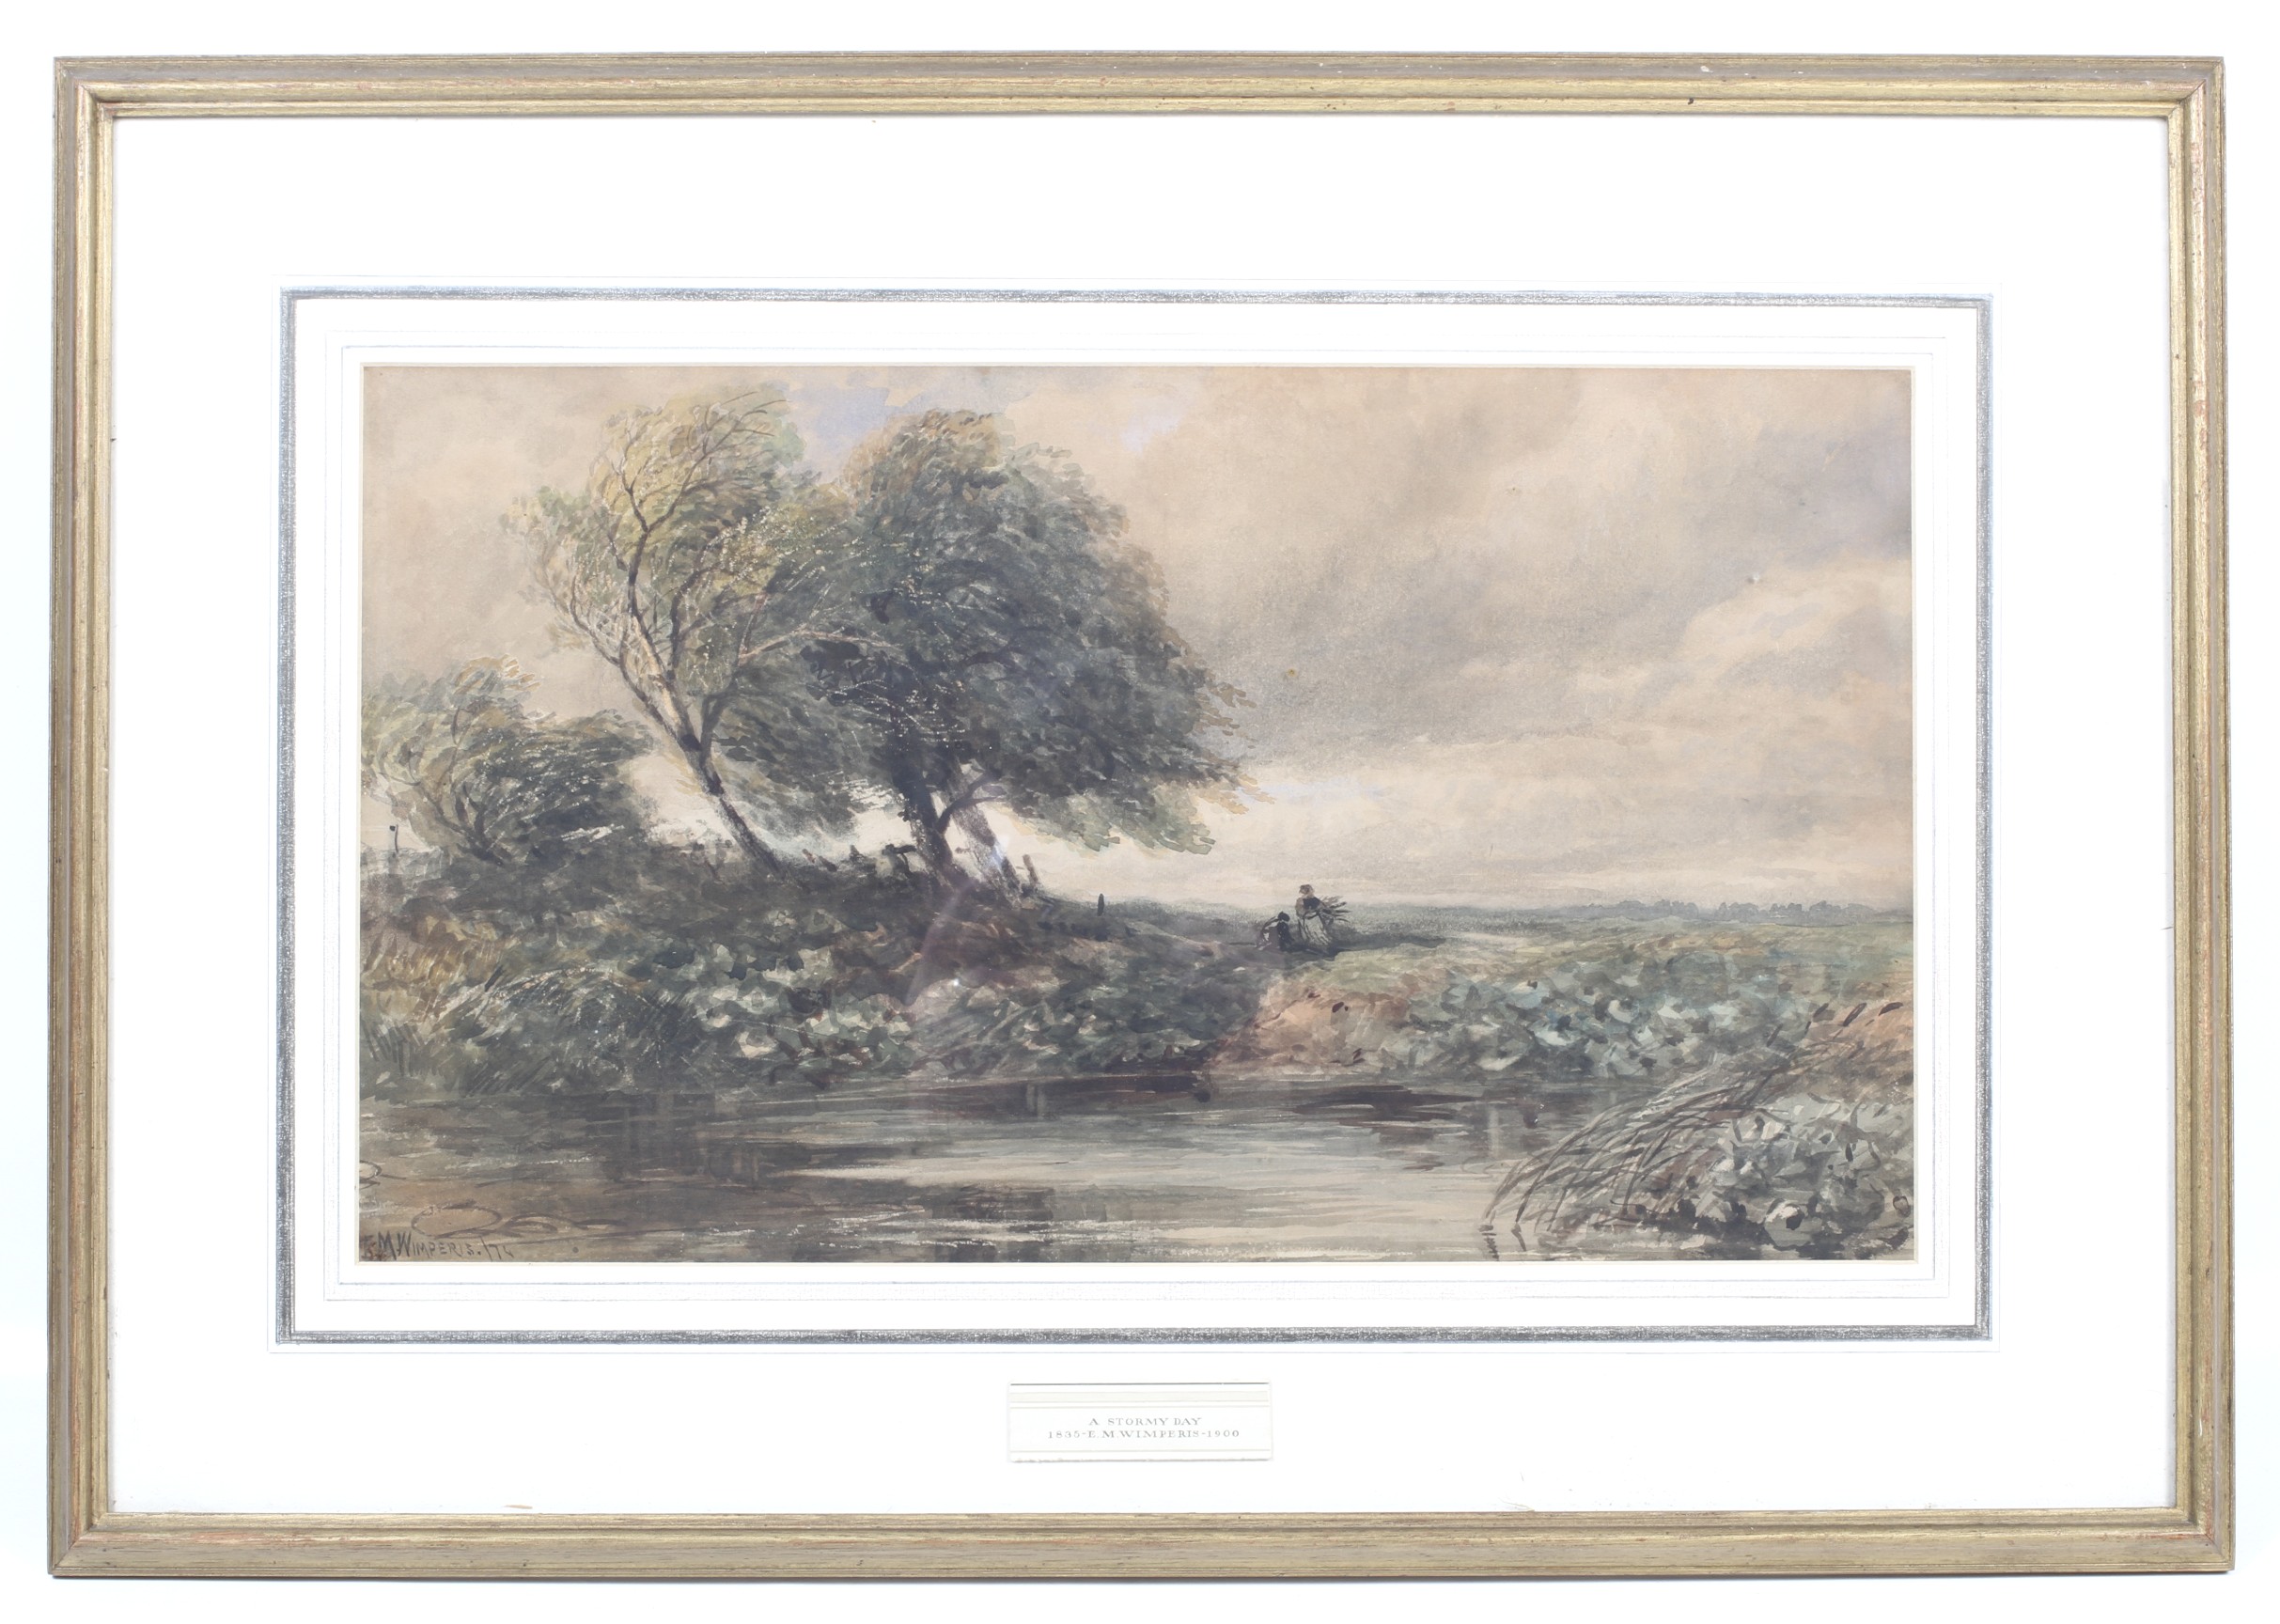 Edmond Morison Wimperis (1835-1900), watercolour, 'A Stormy Day'. - Image 2 of 3